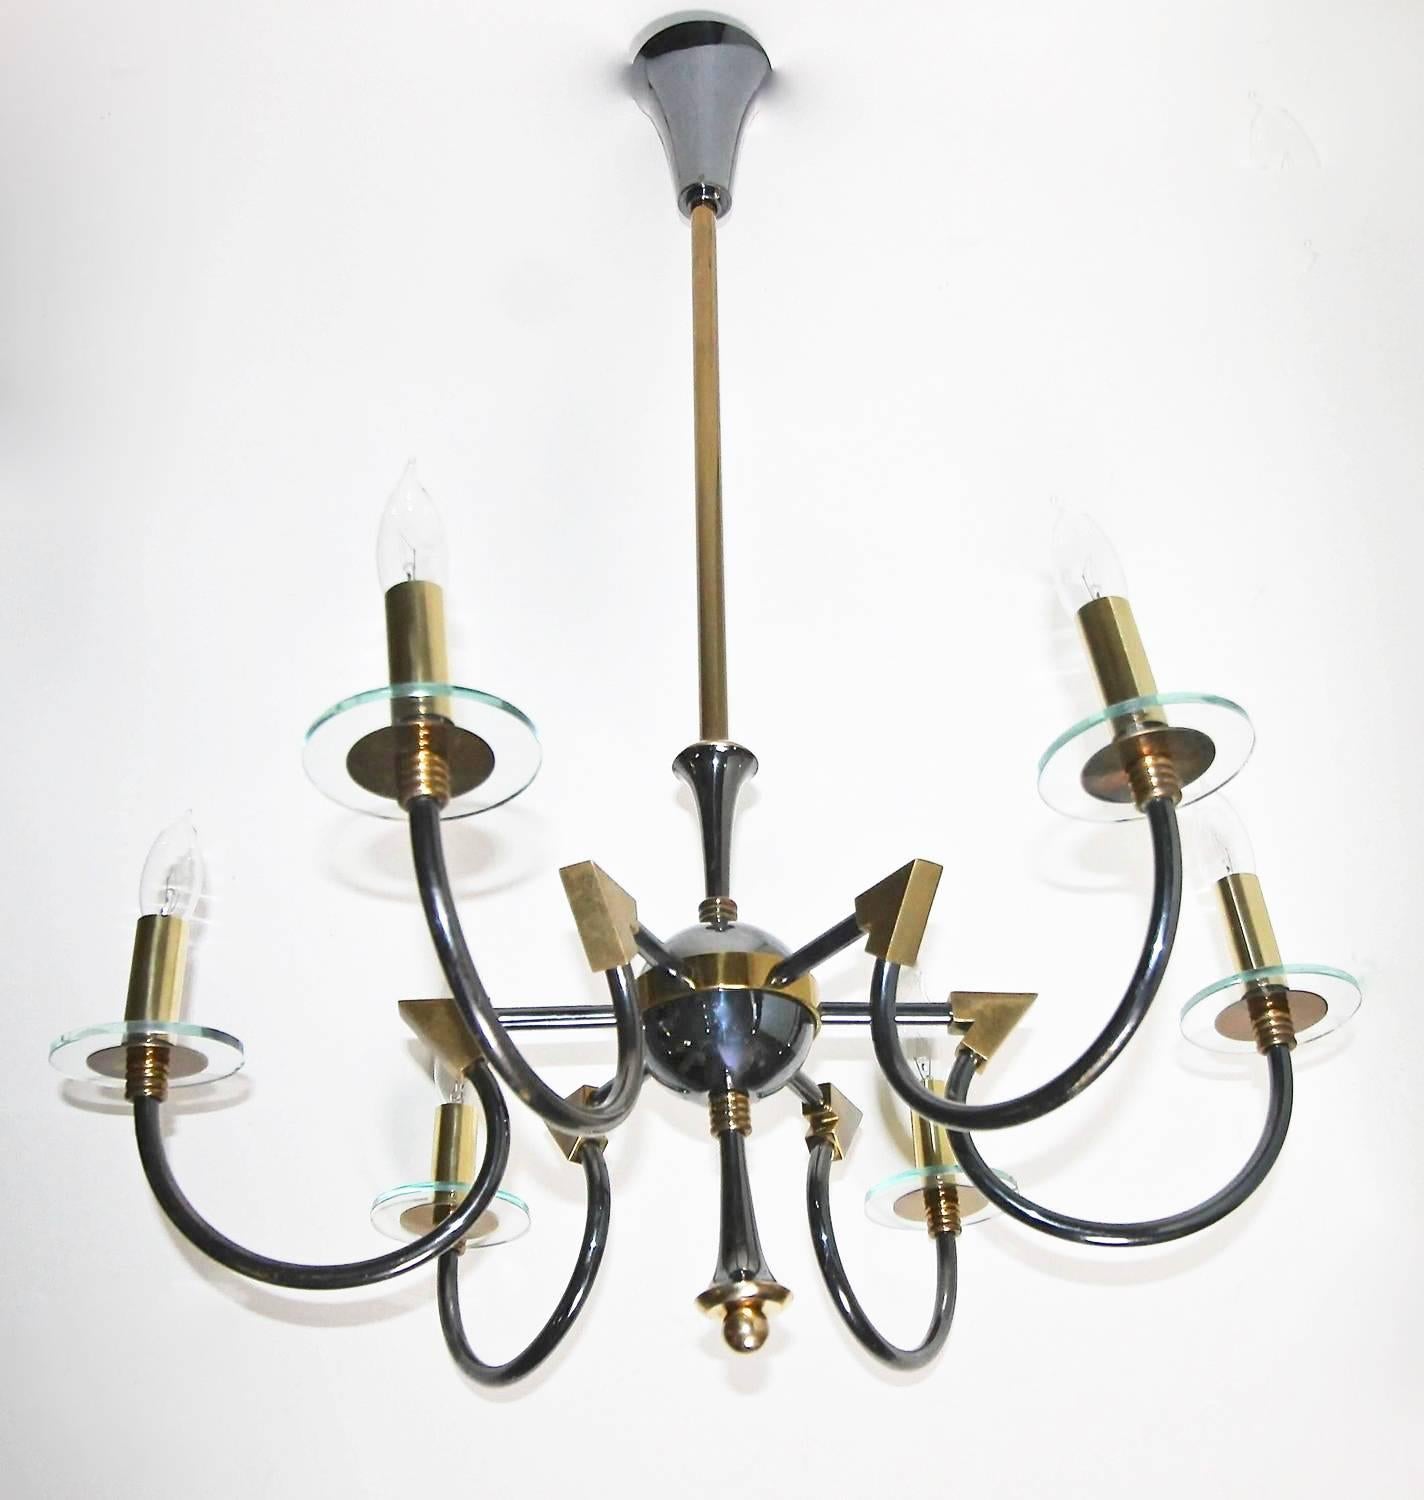 French moderne brass patinated six-arm chandelier by Maison Lunel, France. Sleek detailing including curved arms each with glass bobeche. Uses six 40 watt max candelabra "B" base bulbs. Newly wired. Overall height including center rod and